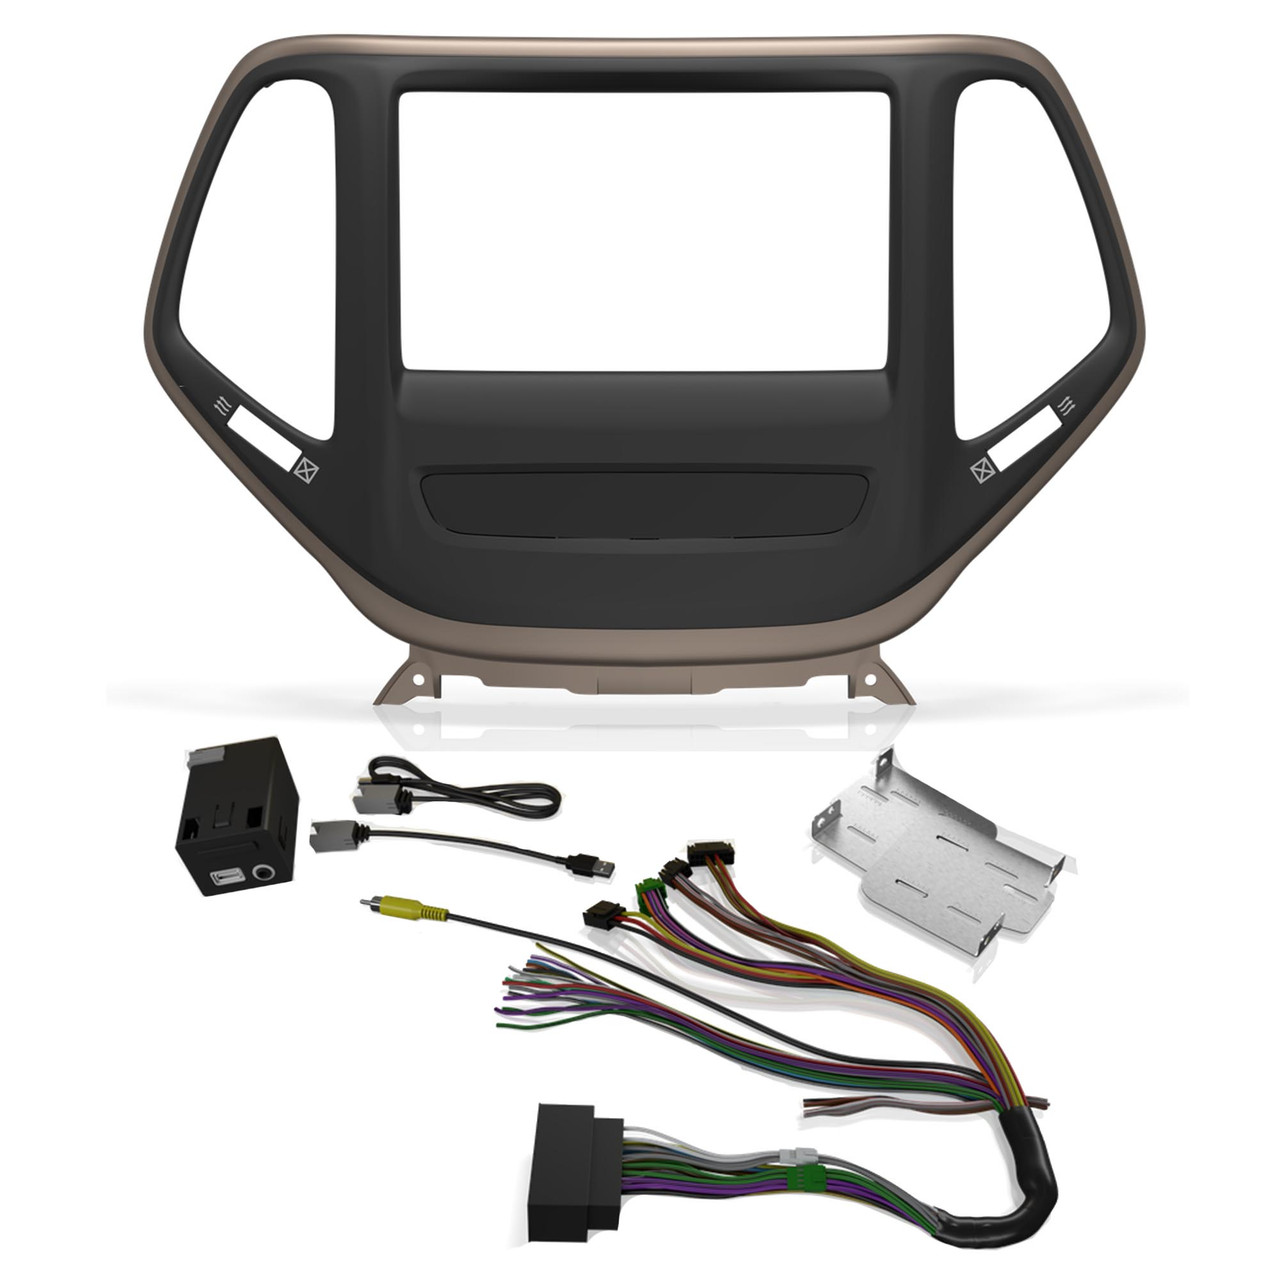 Idatalink Maestro CHK1 Dash Kit, USB box and T-harness for 2014